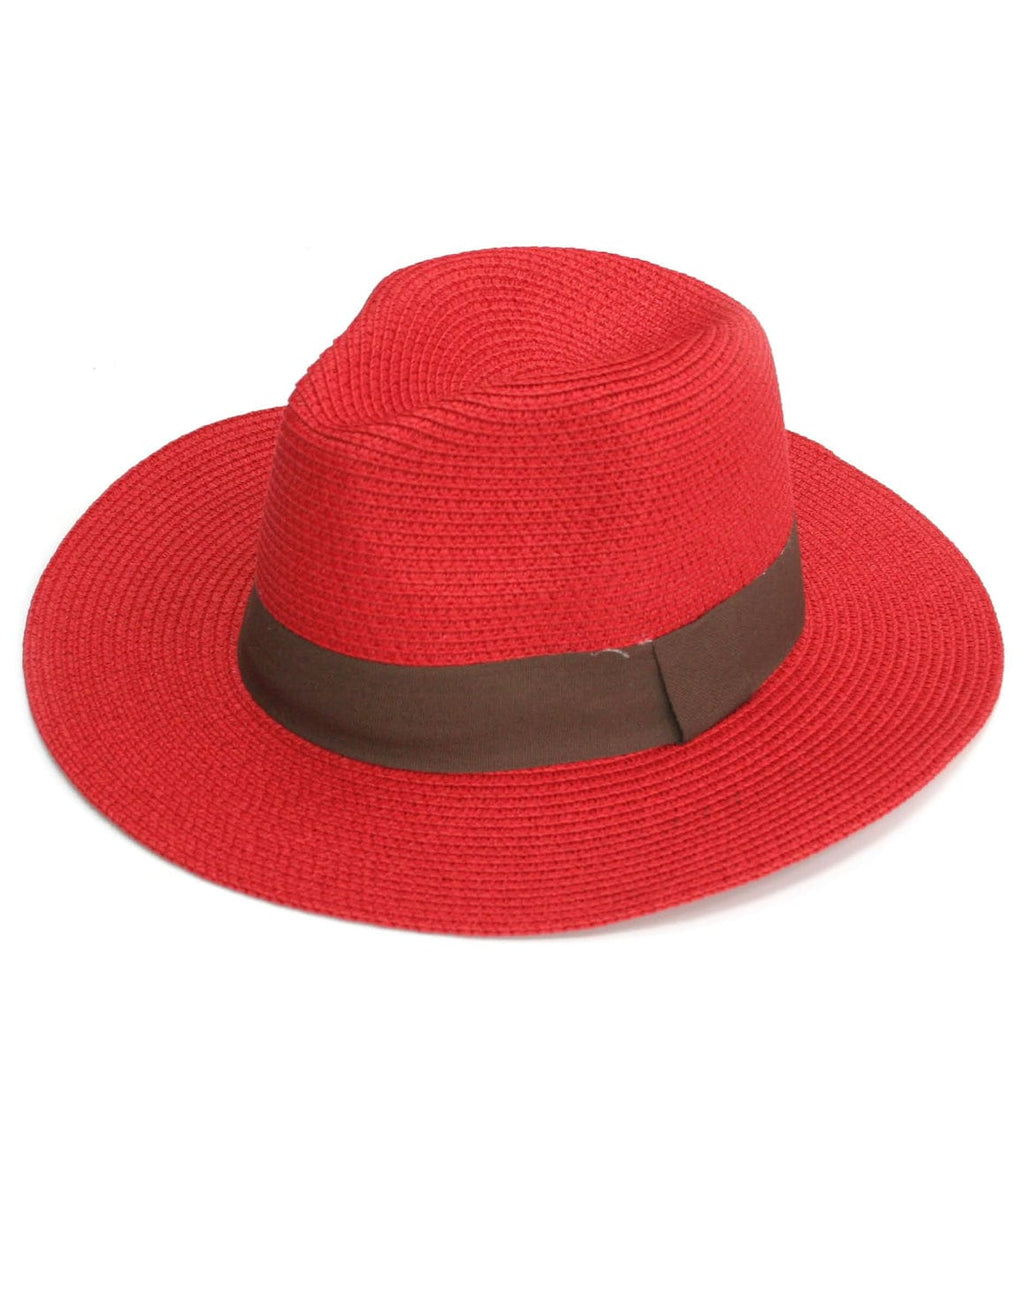 https://cdn.shopify.com/s/files/1/0607/3634/0158/files/lusciousscarves-hats-red-foldable-panama-hat-rollable-packable-sun-hat-31056718201022_1024x.jpg?v=1682365158